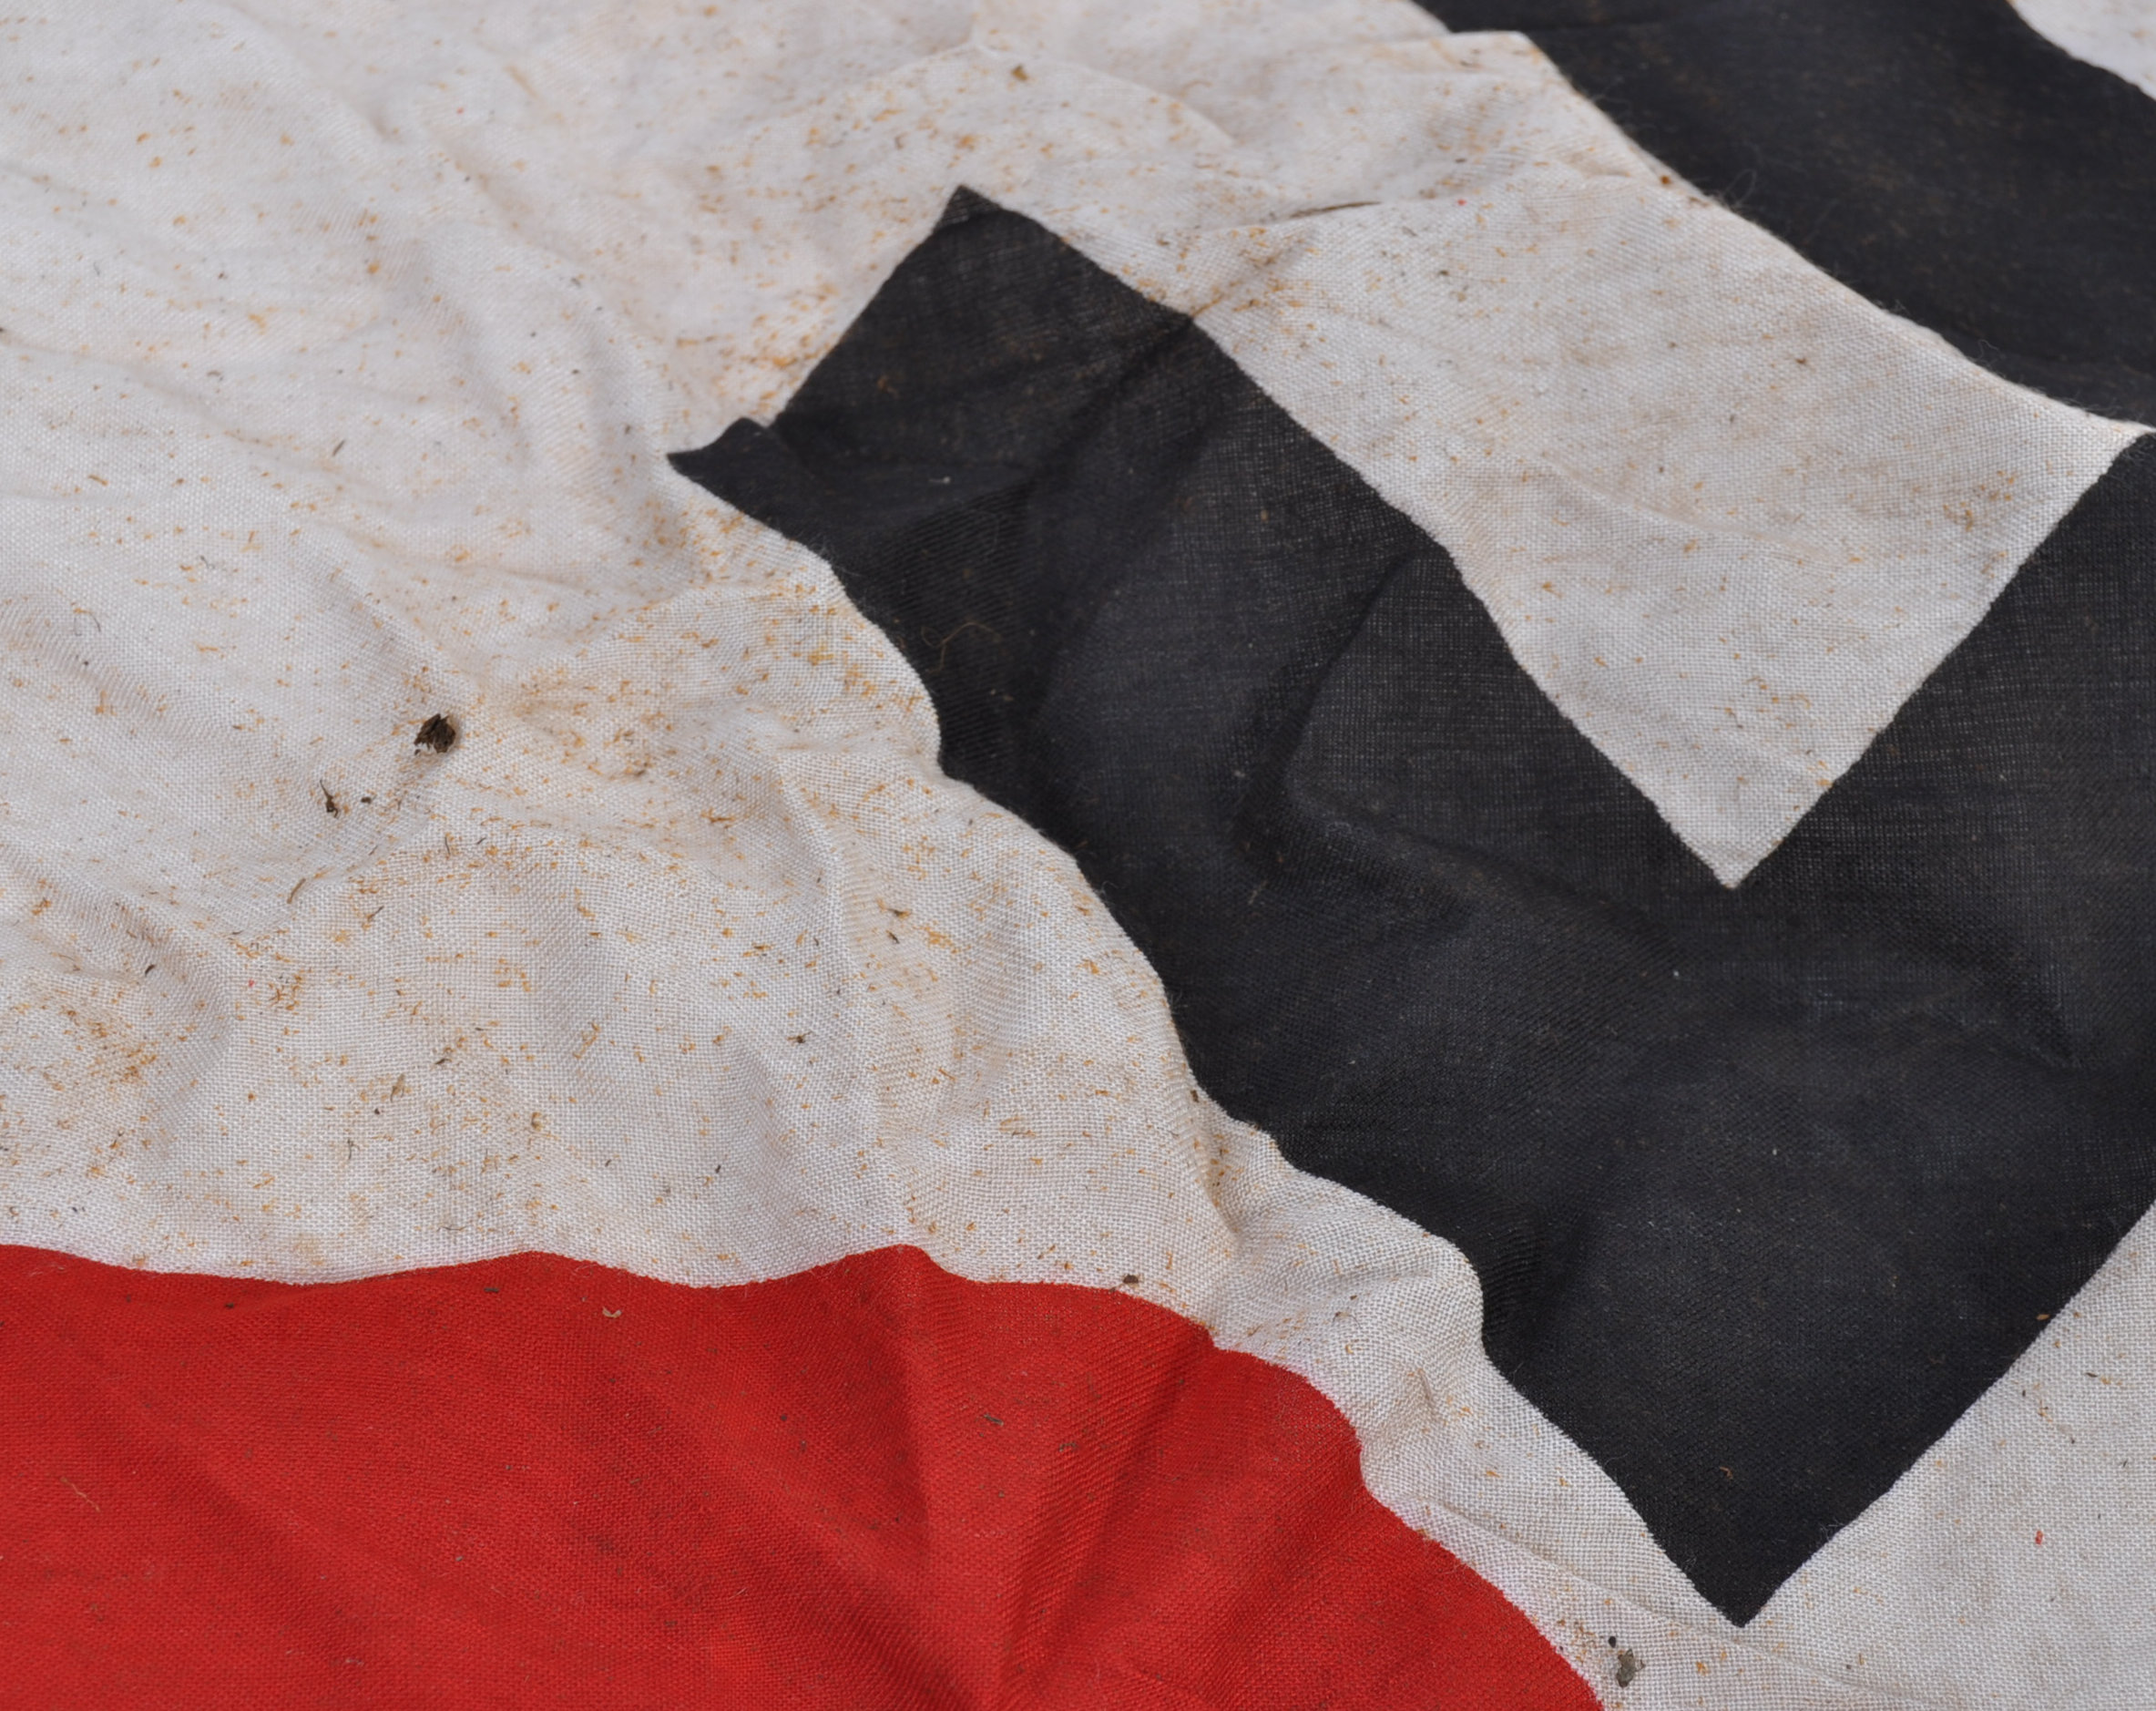 WWII SECOND WORLD WAR NSDAP NAZI PARTY FLAG - Image 3 of 5